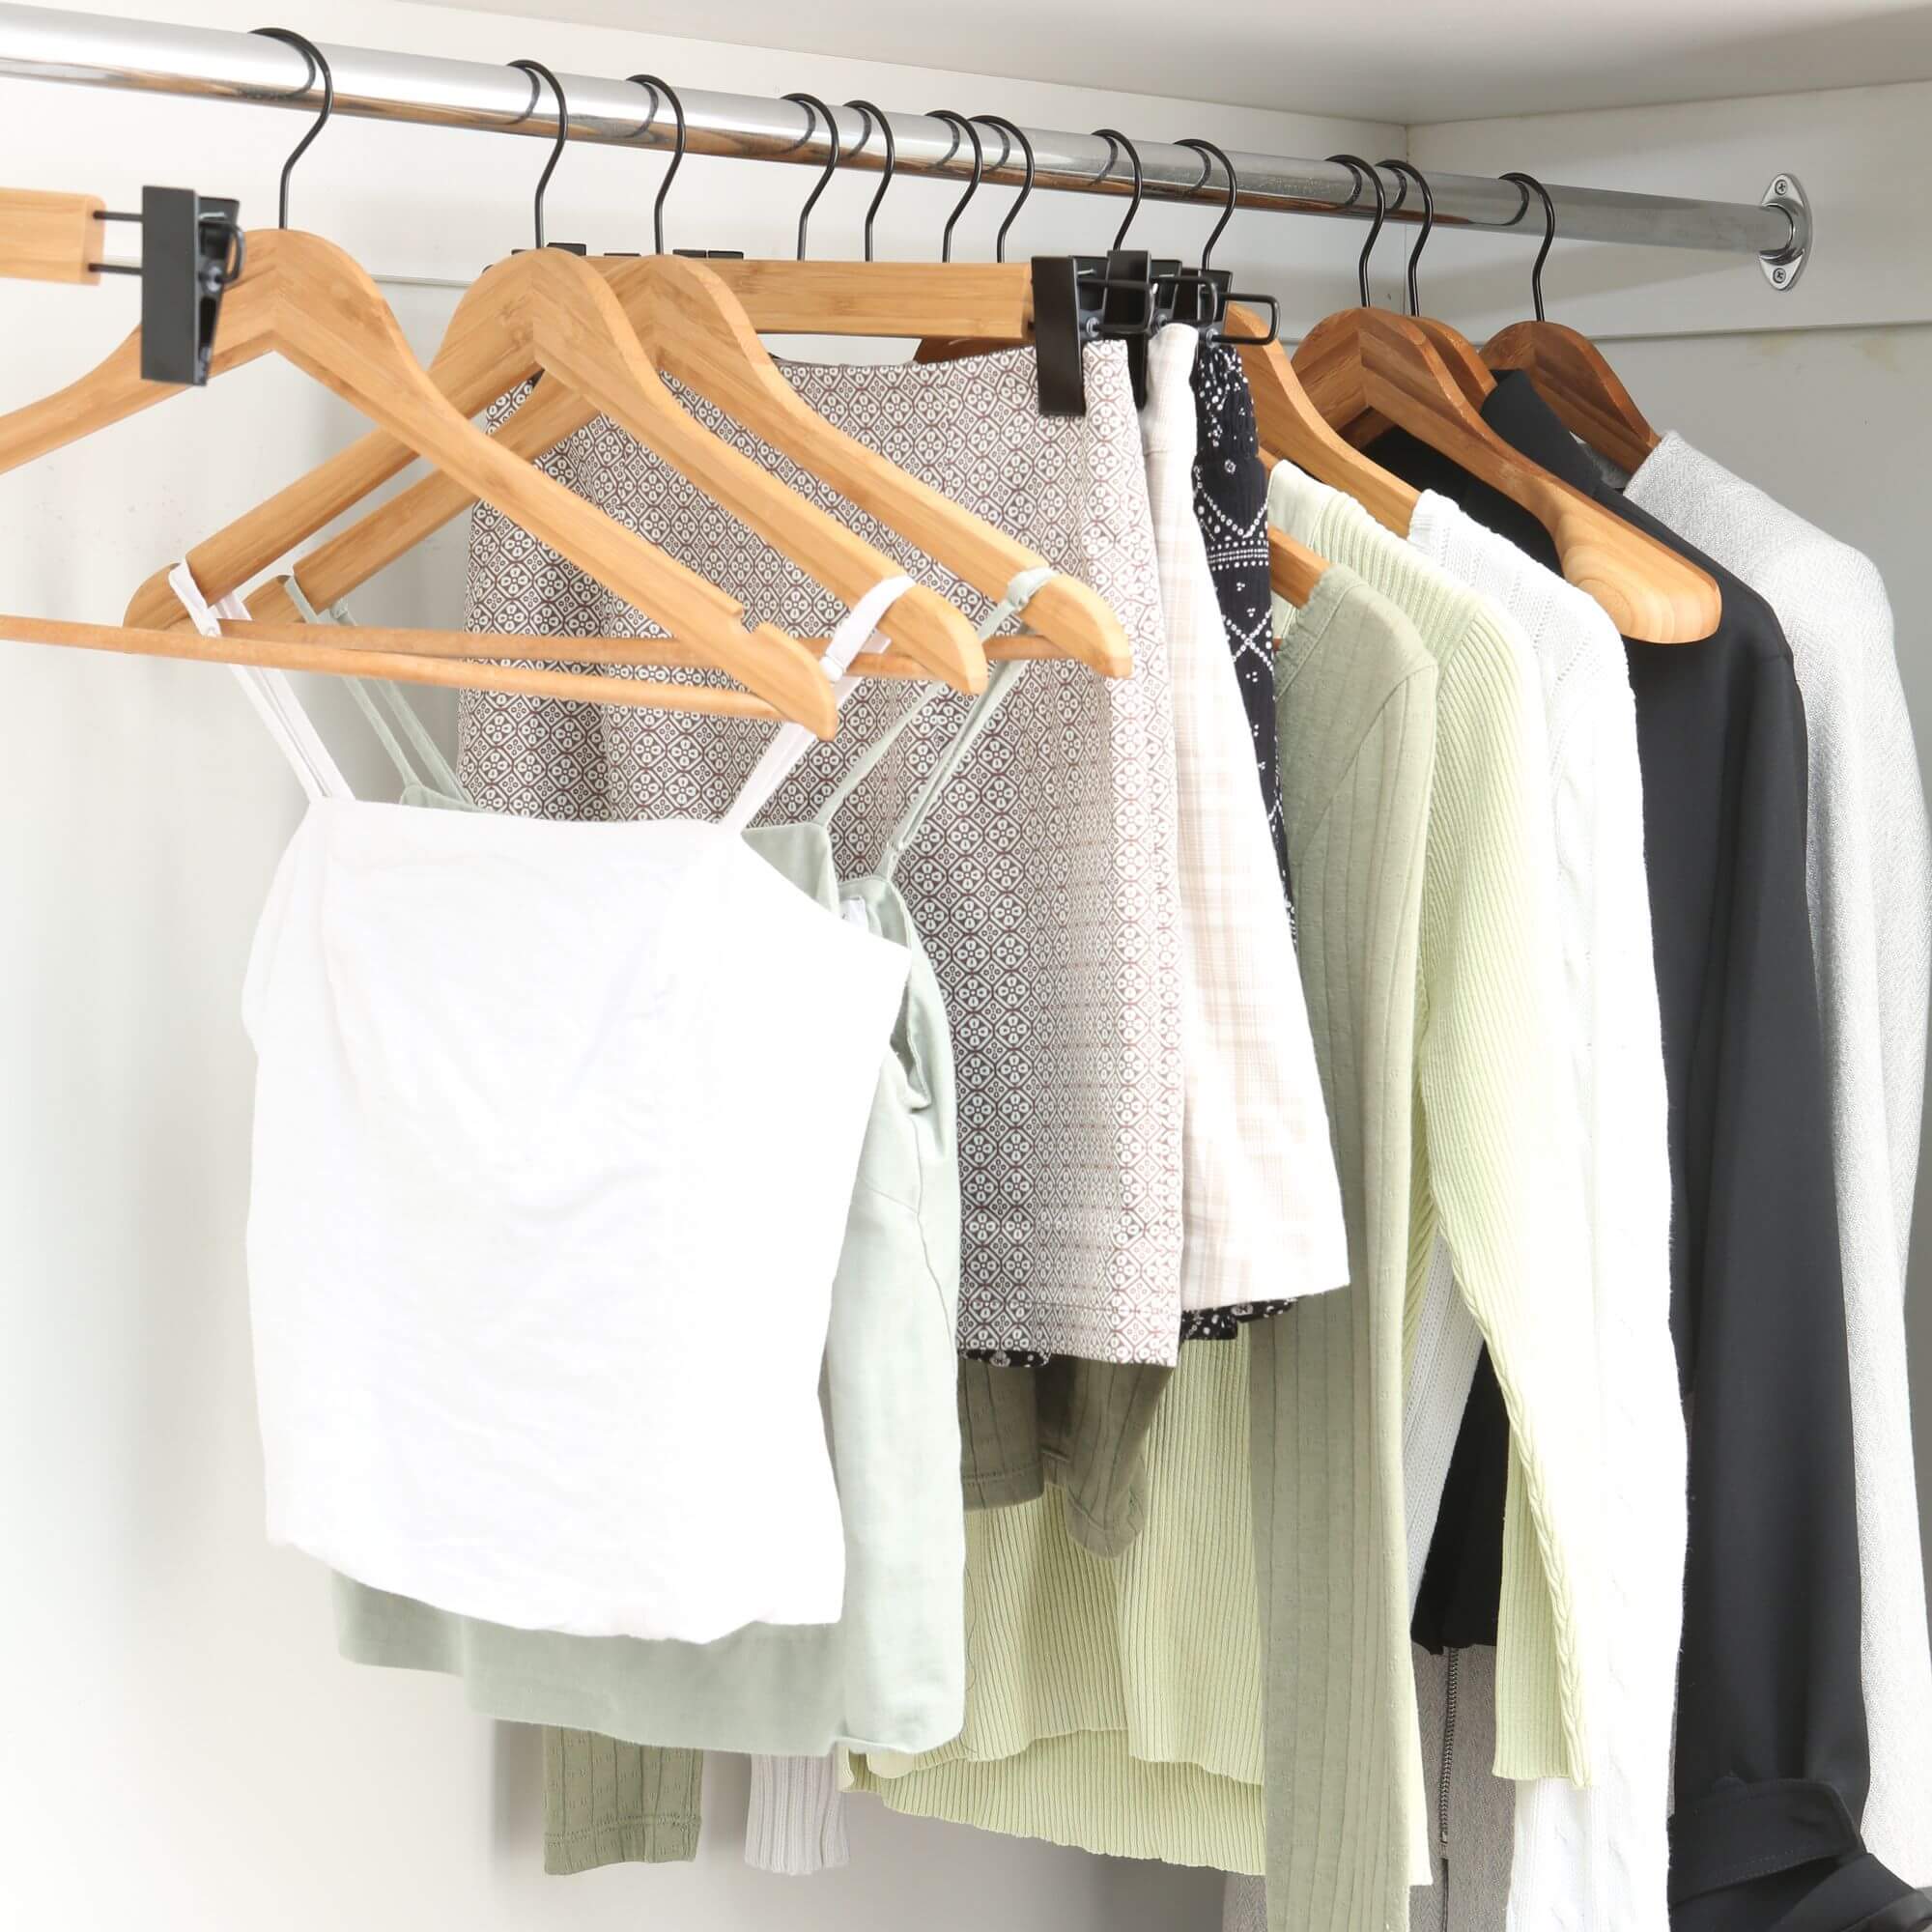 Sustainably-sourced bamboo clothes hangers hanging on a rail